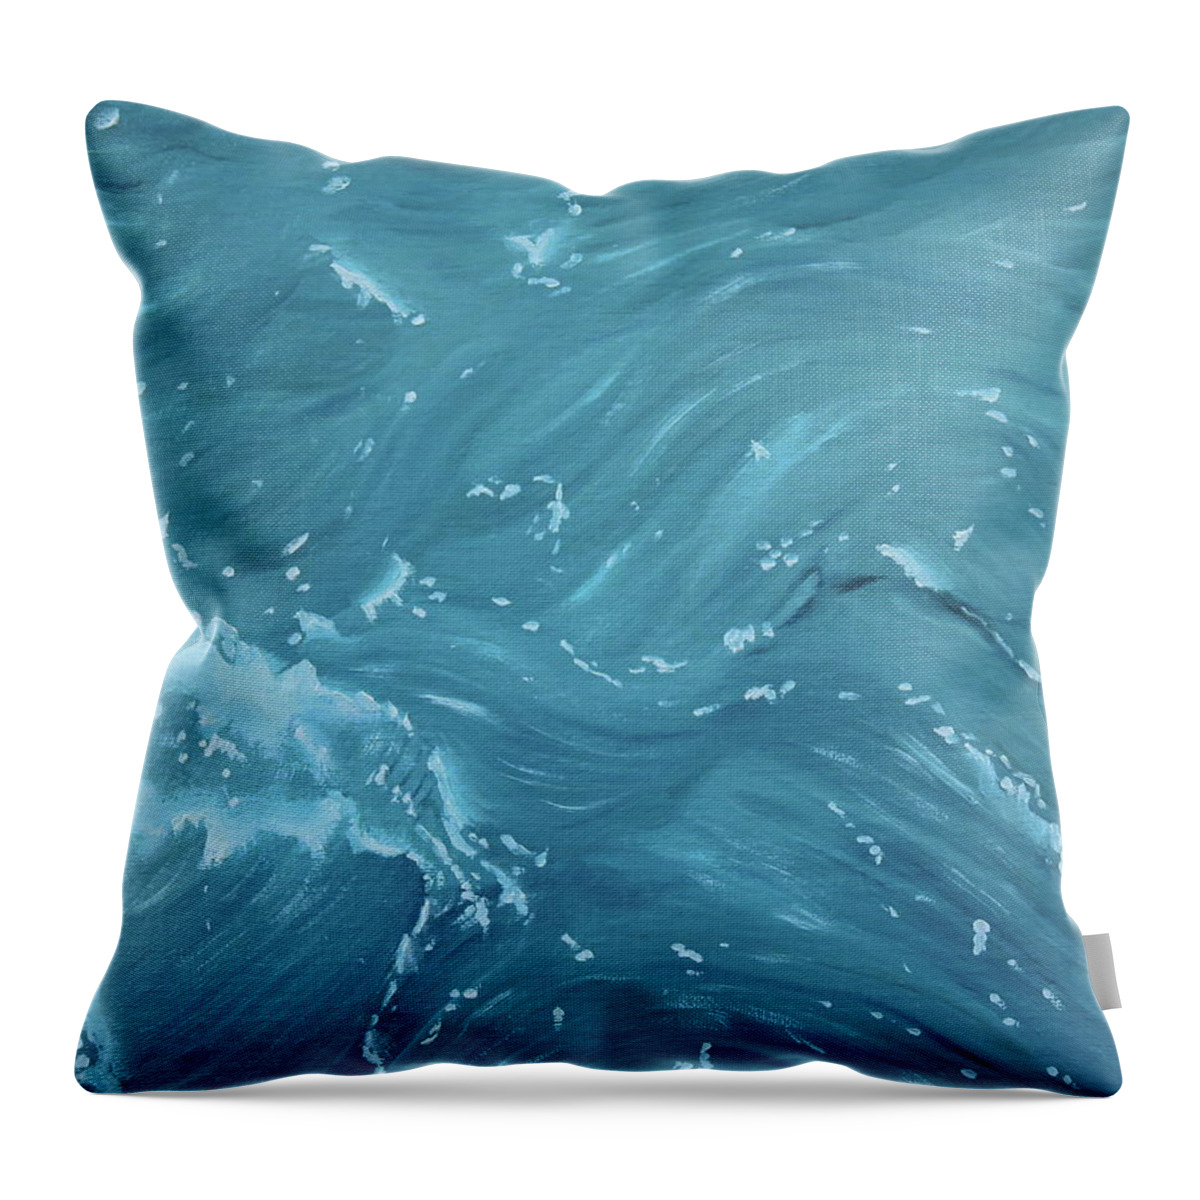 Waves Throw Pillow featuring the painting Waves - Light Blue by Neslihan Ergul Colley